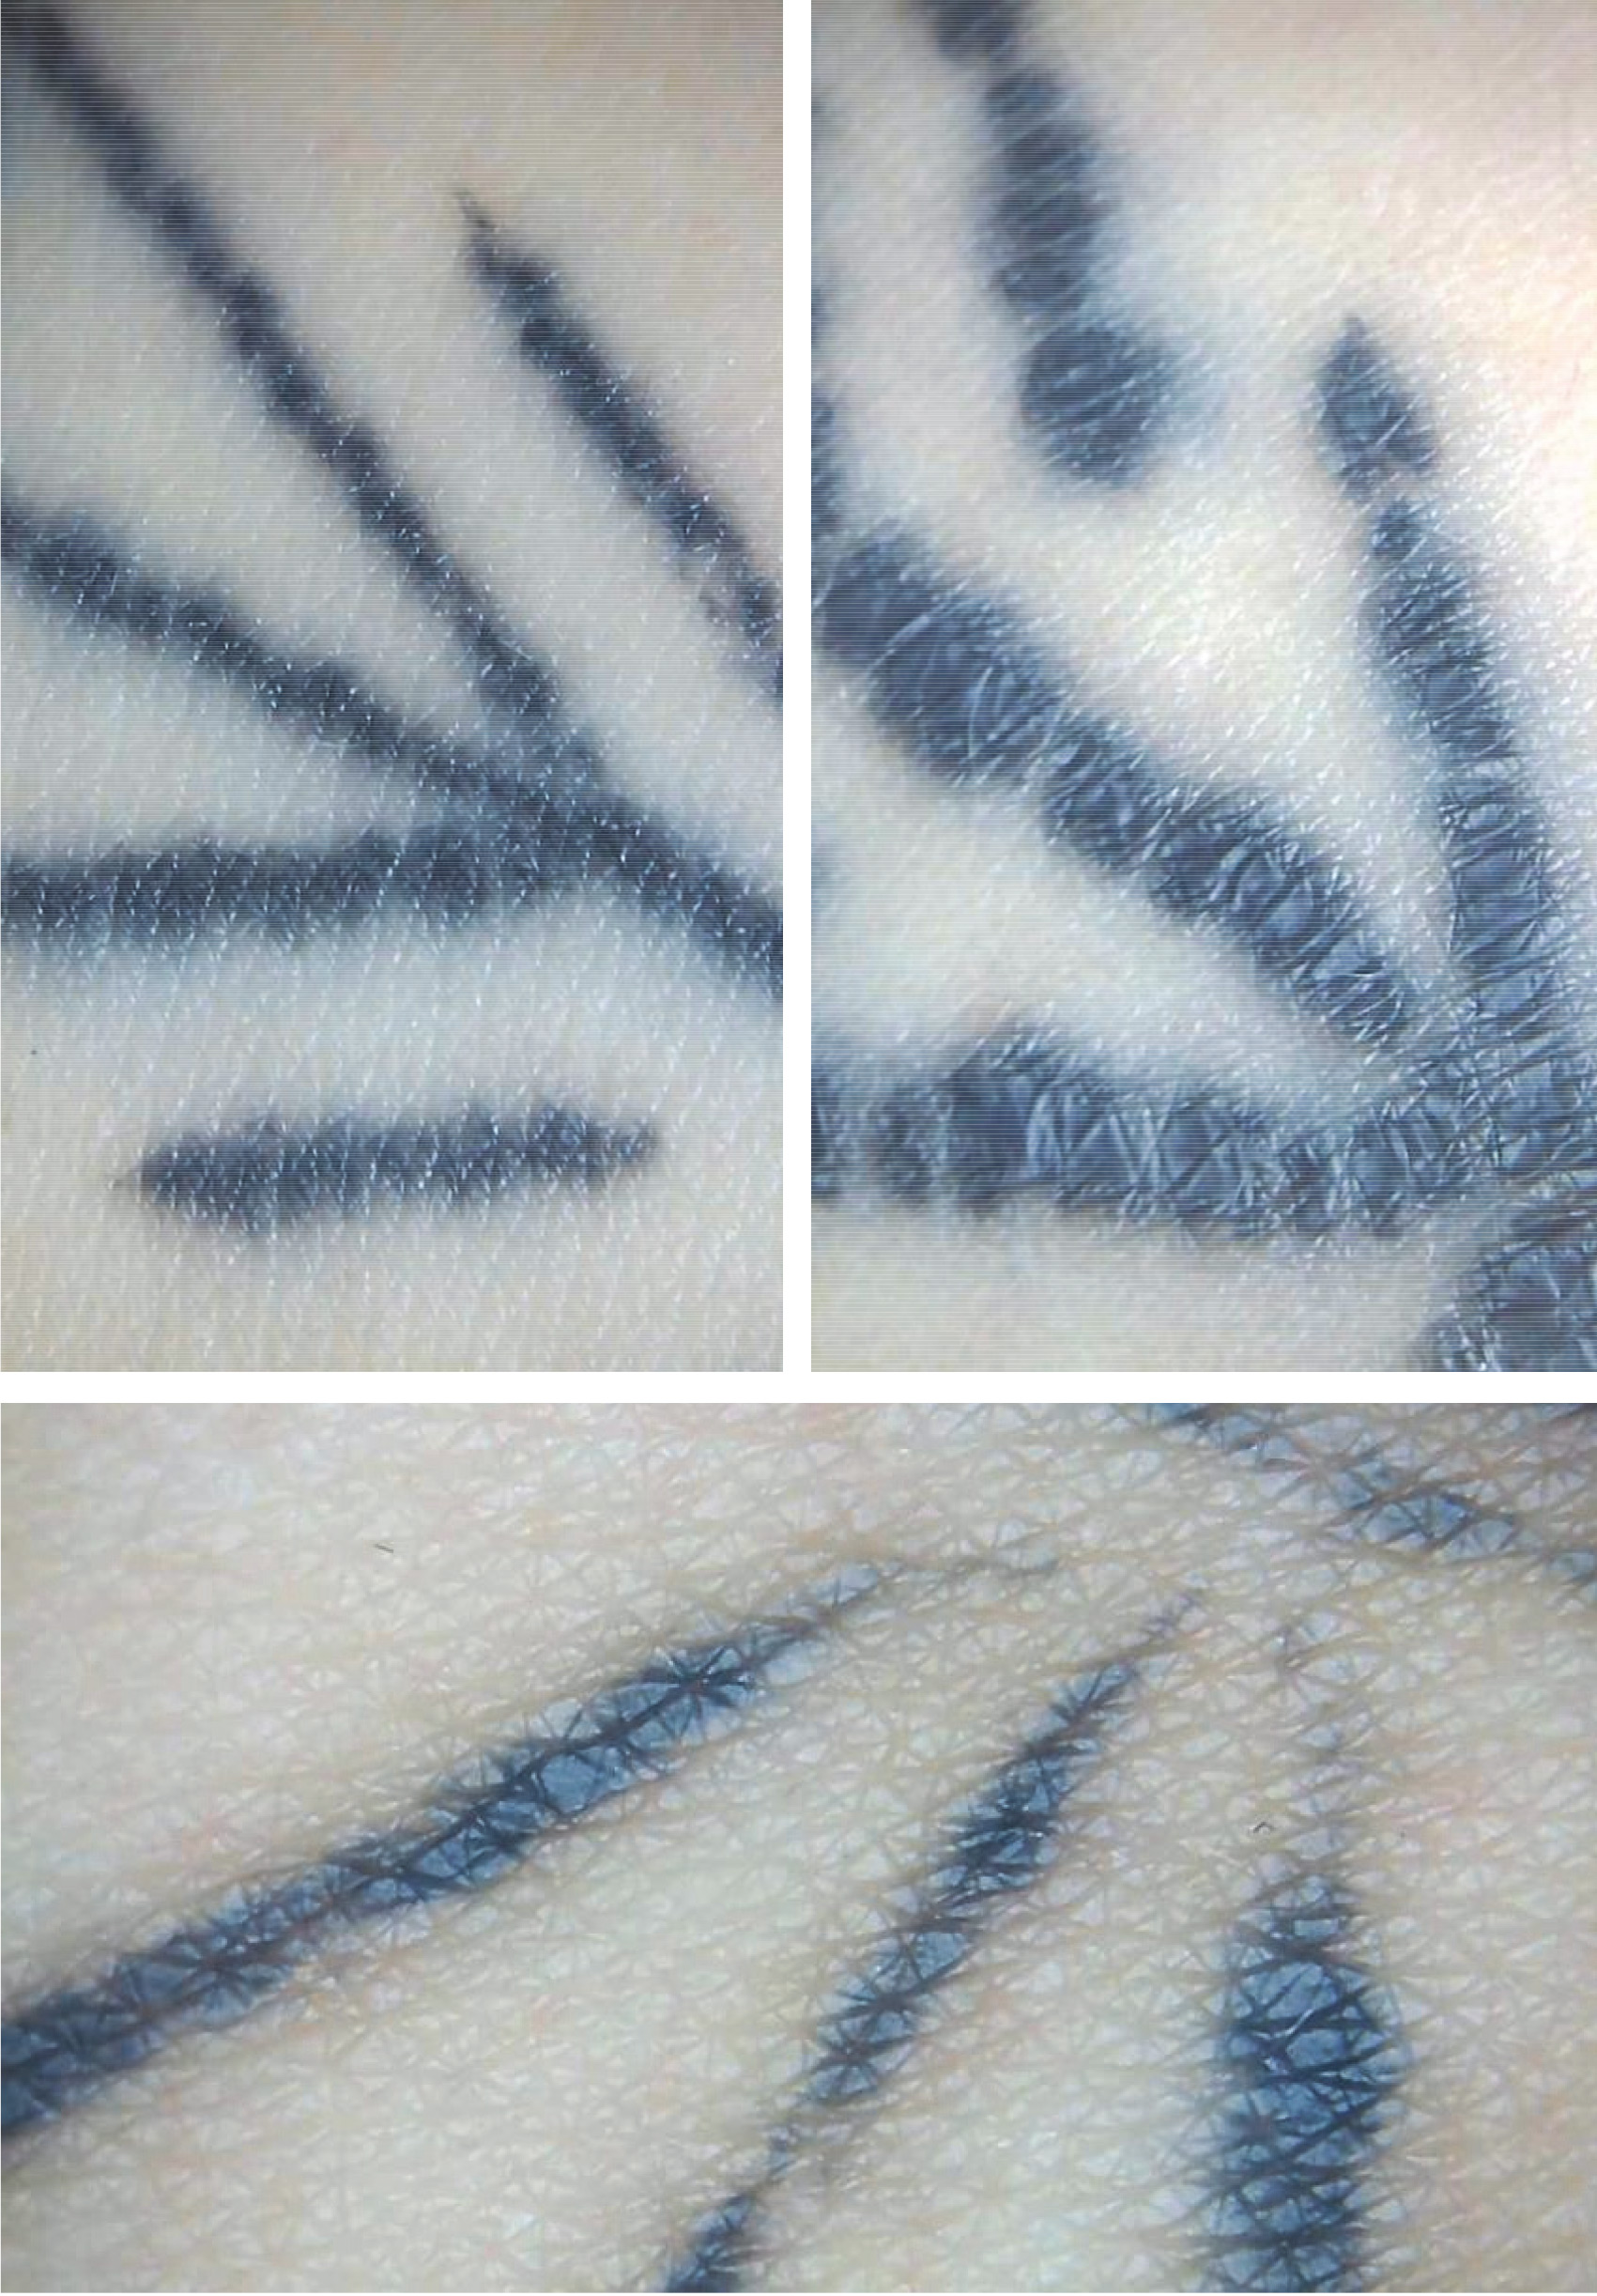 details of tattooed lines